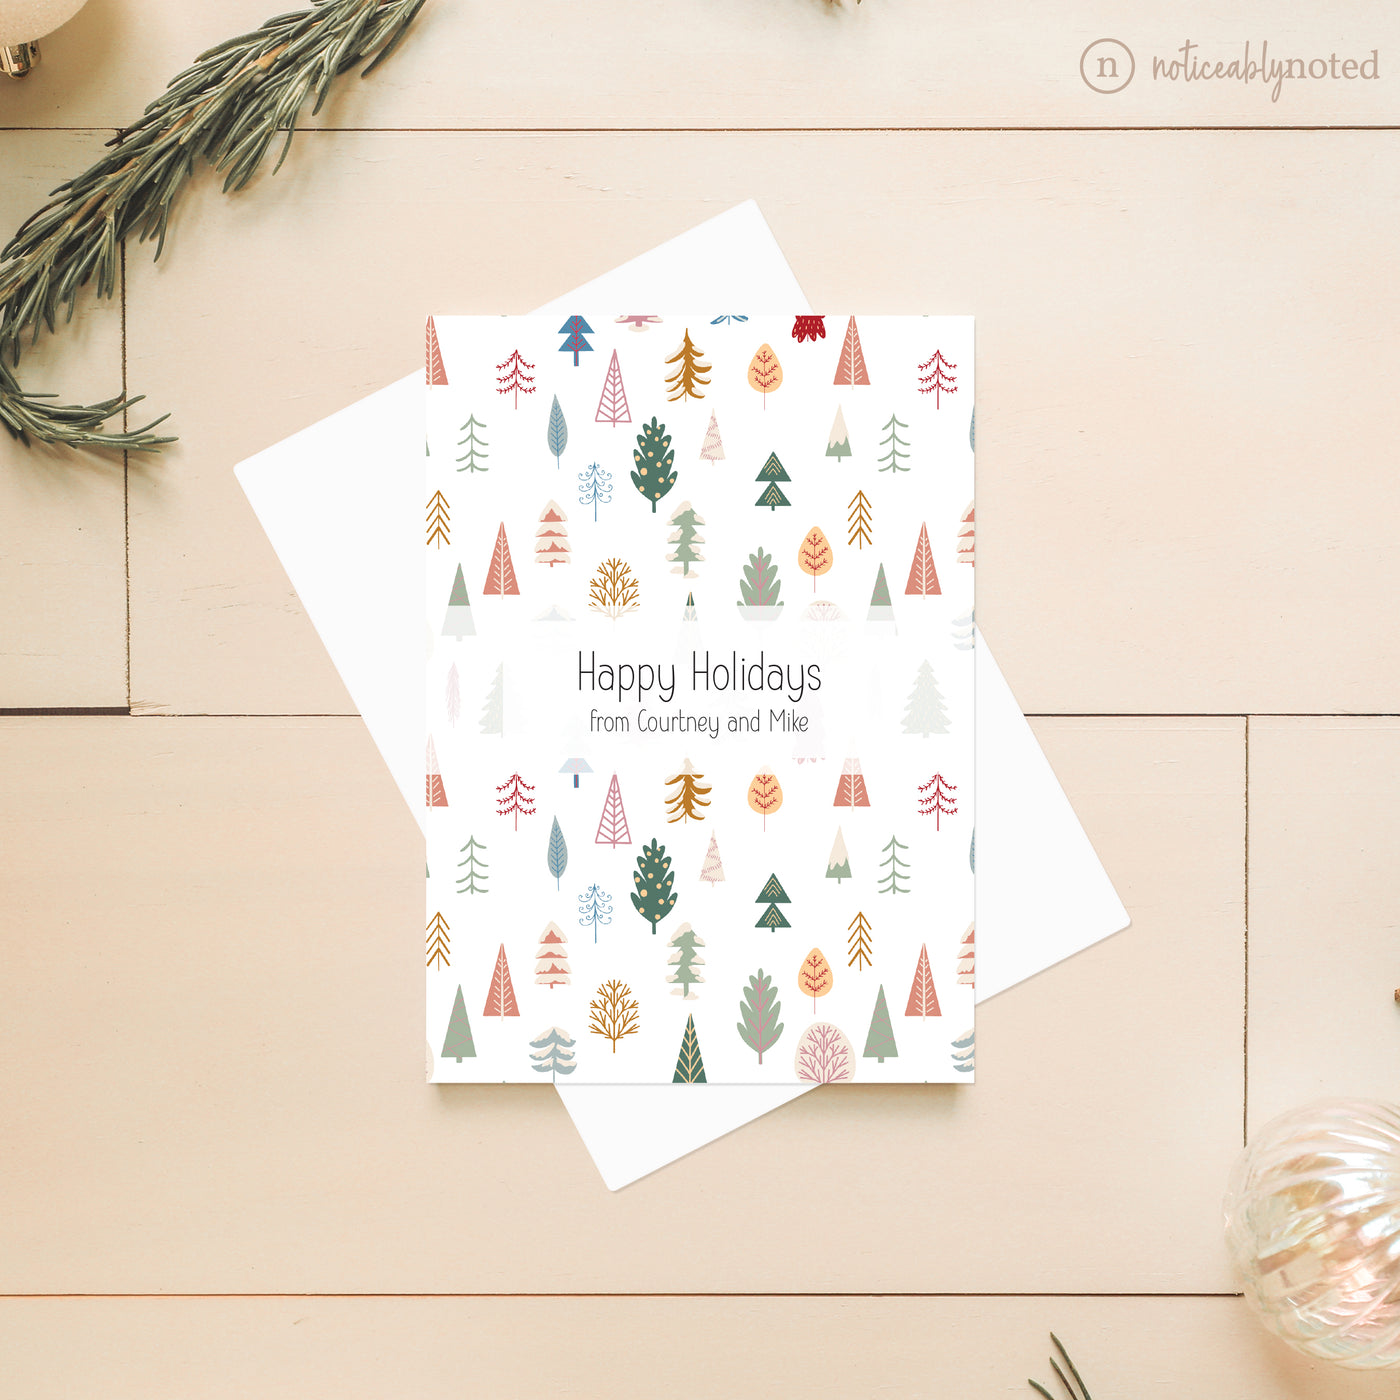 Tiled Trees Holiday Cards | Noticeably Noted